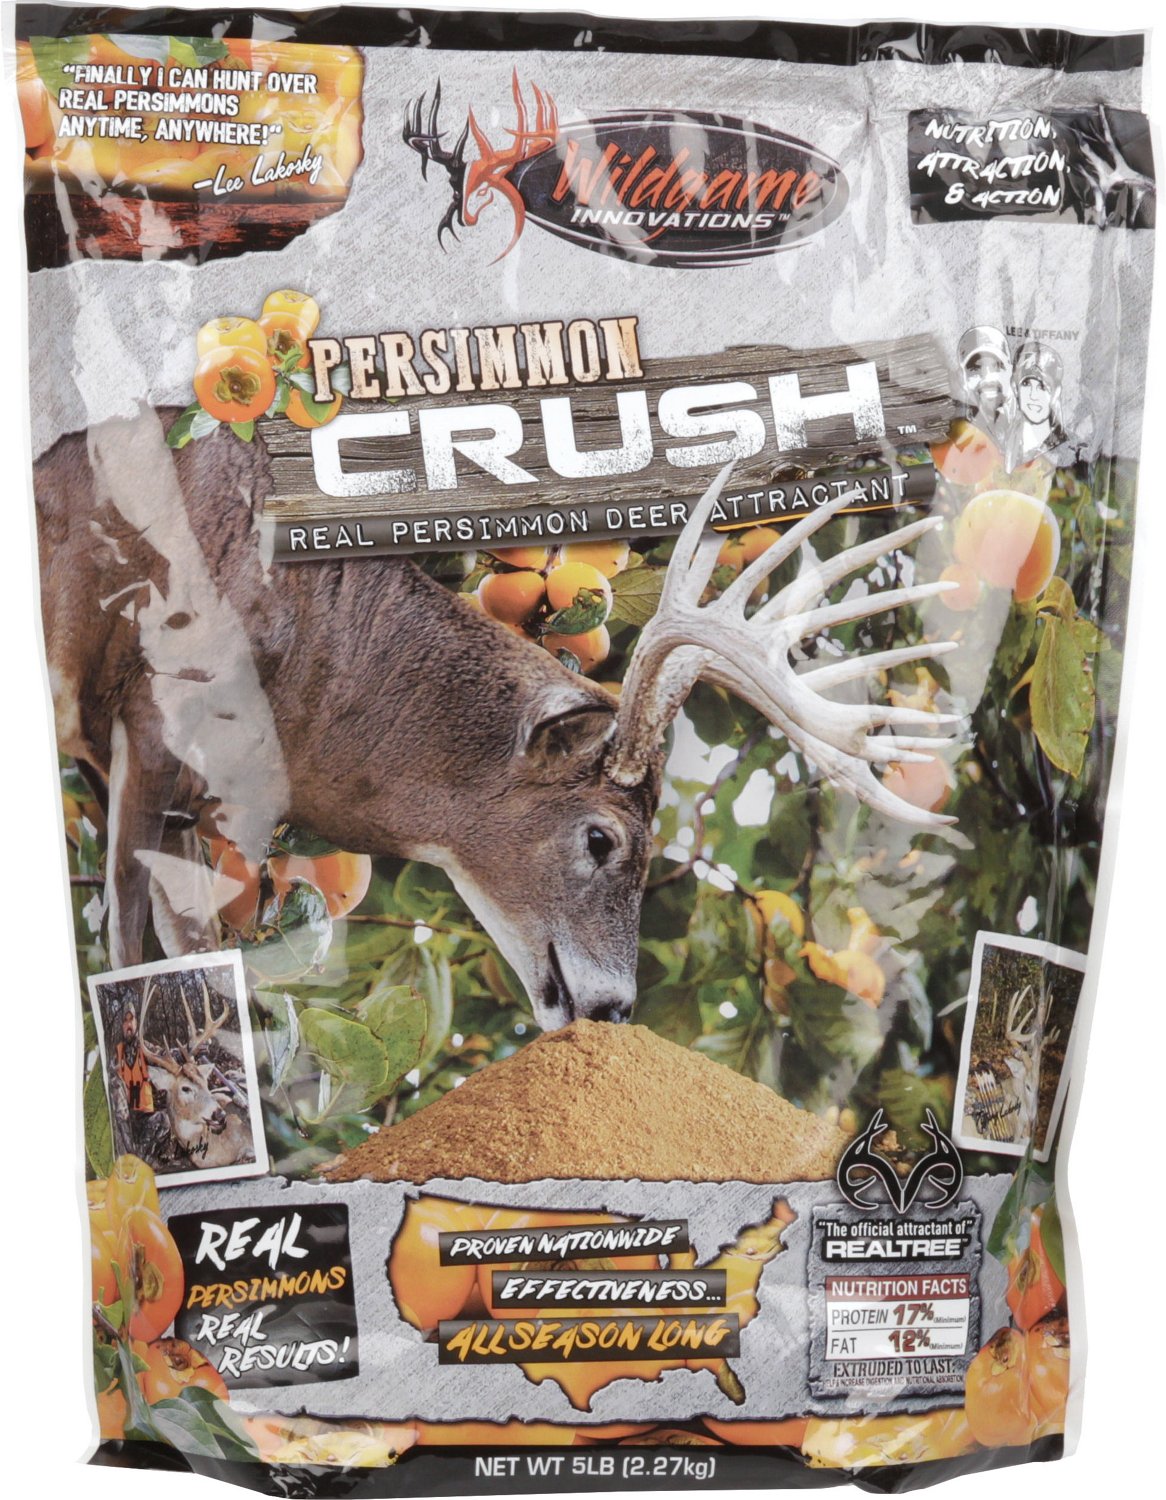 Wildgame Innovations Persimmon Crush 5 lbs Deer Attractant | Academy